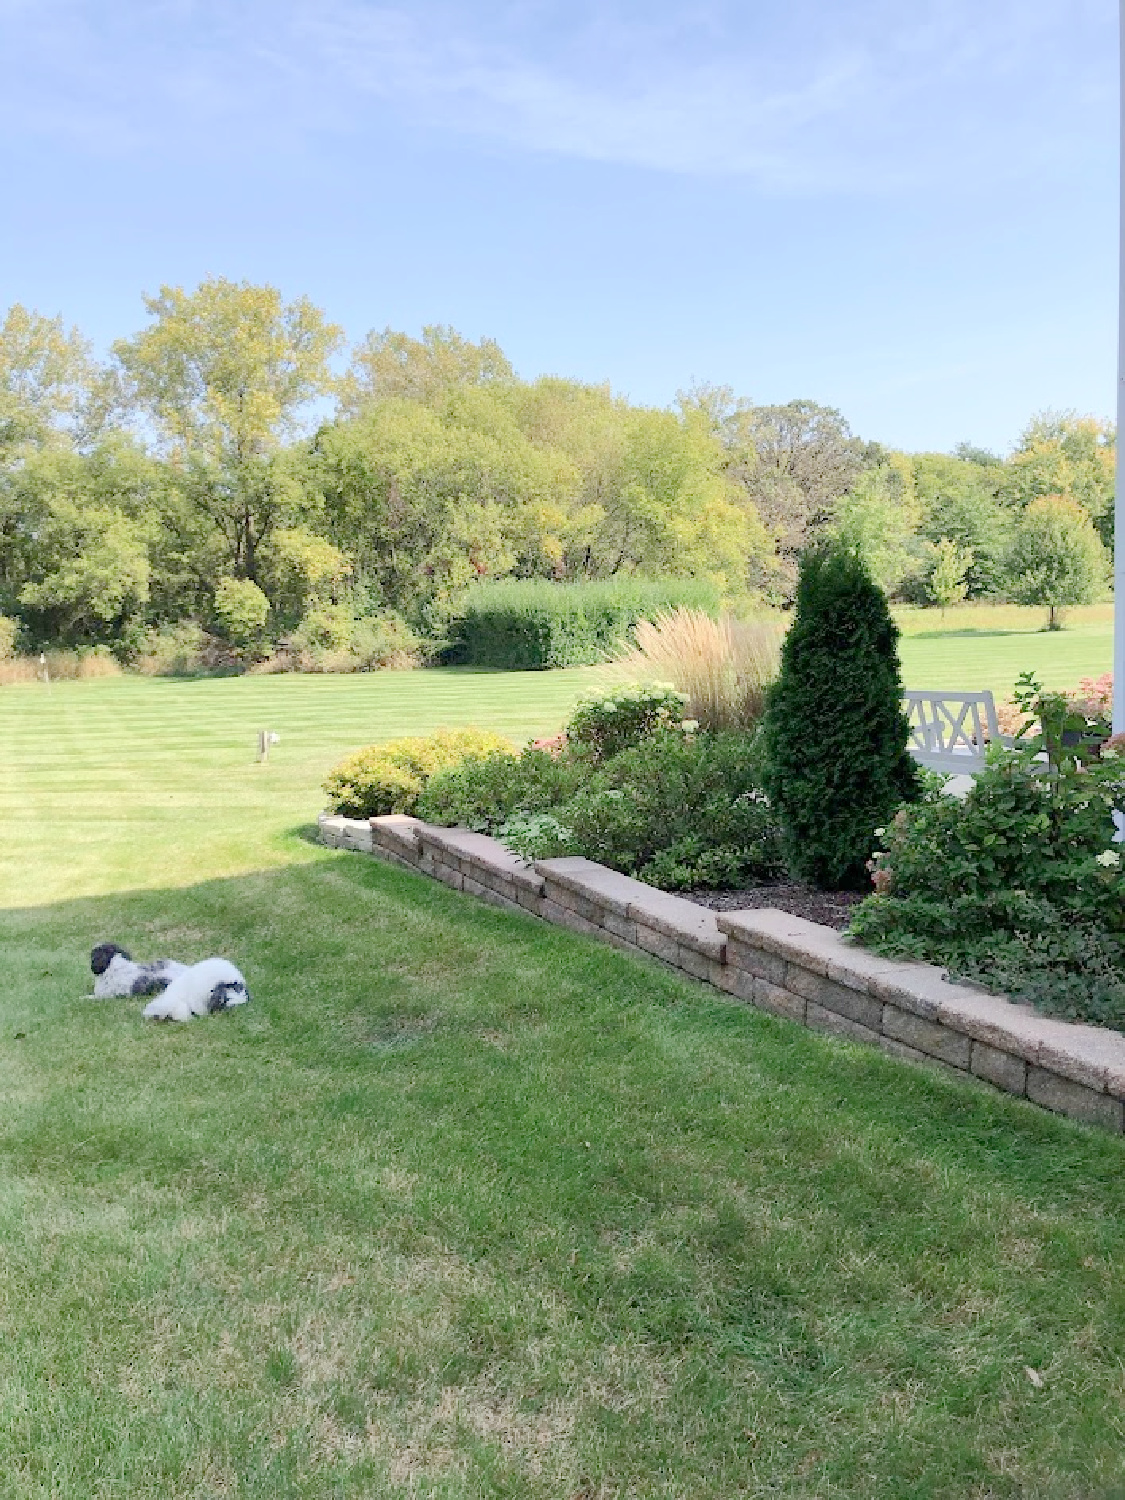 Hello Lovely's backyard with black and white shih tzu.